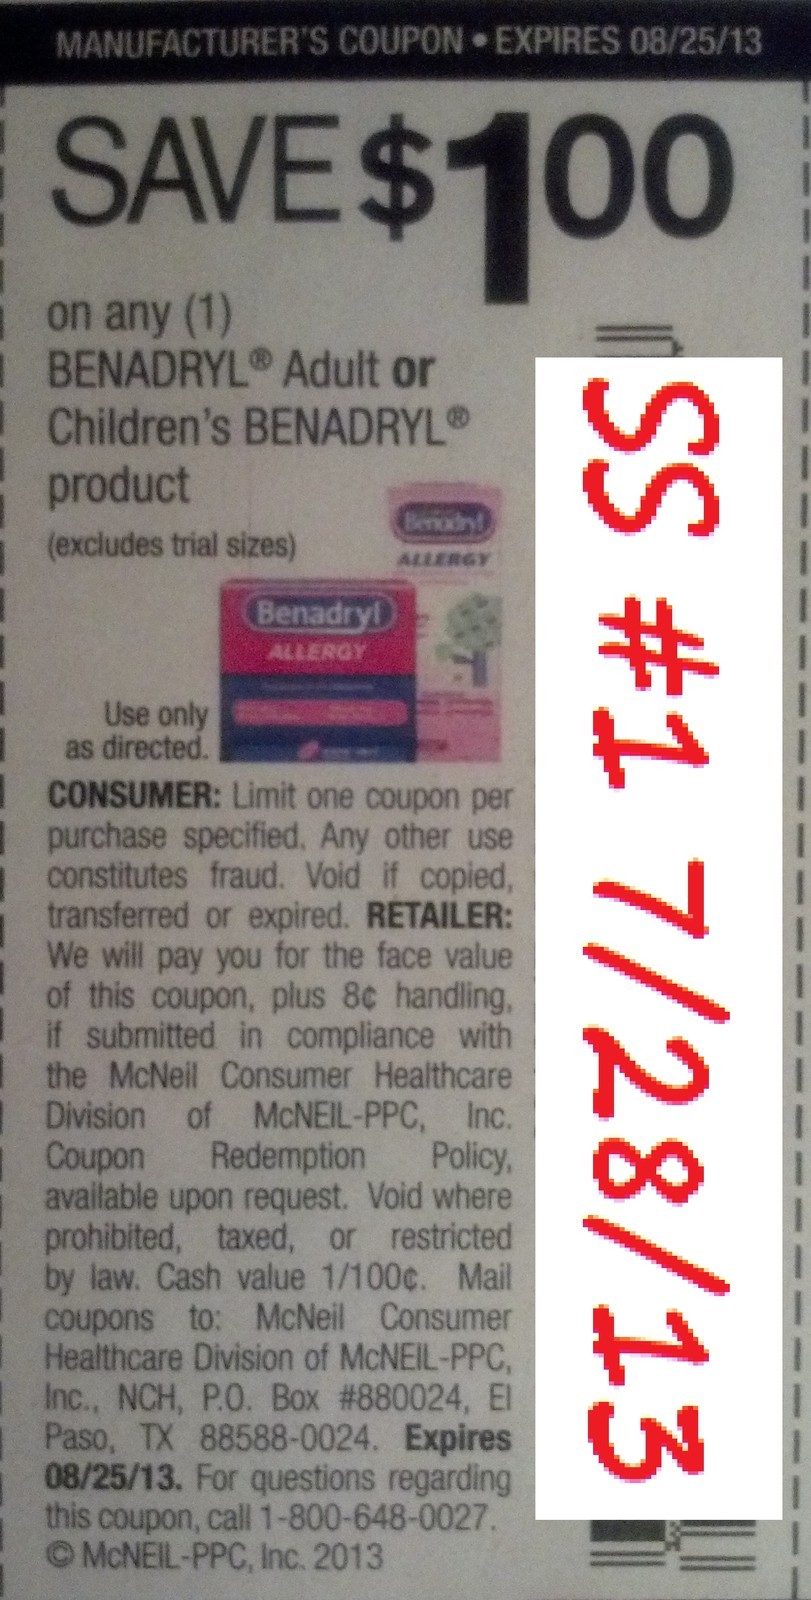 Save $1.00 on any (1) Benadryl Adult or Children's Benadryl product (Excludes trial size) Expires 08-25-2013